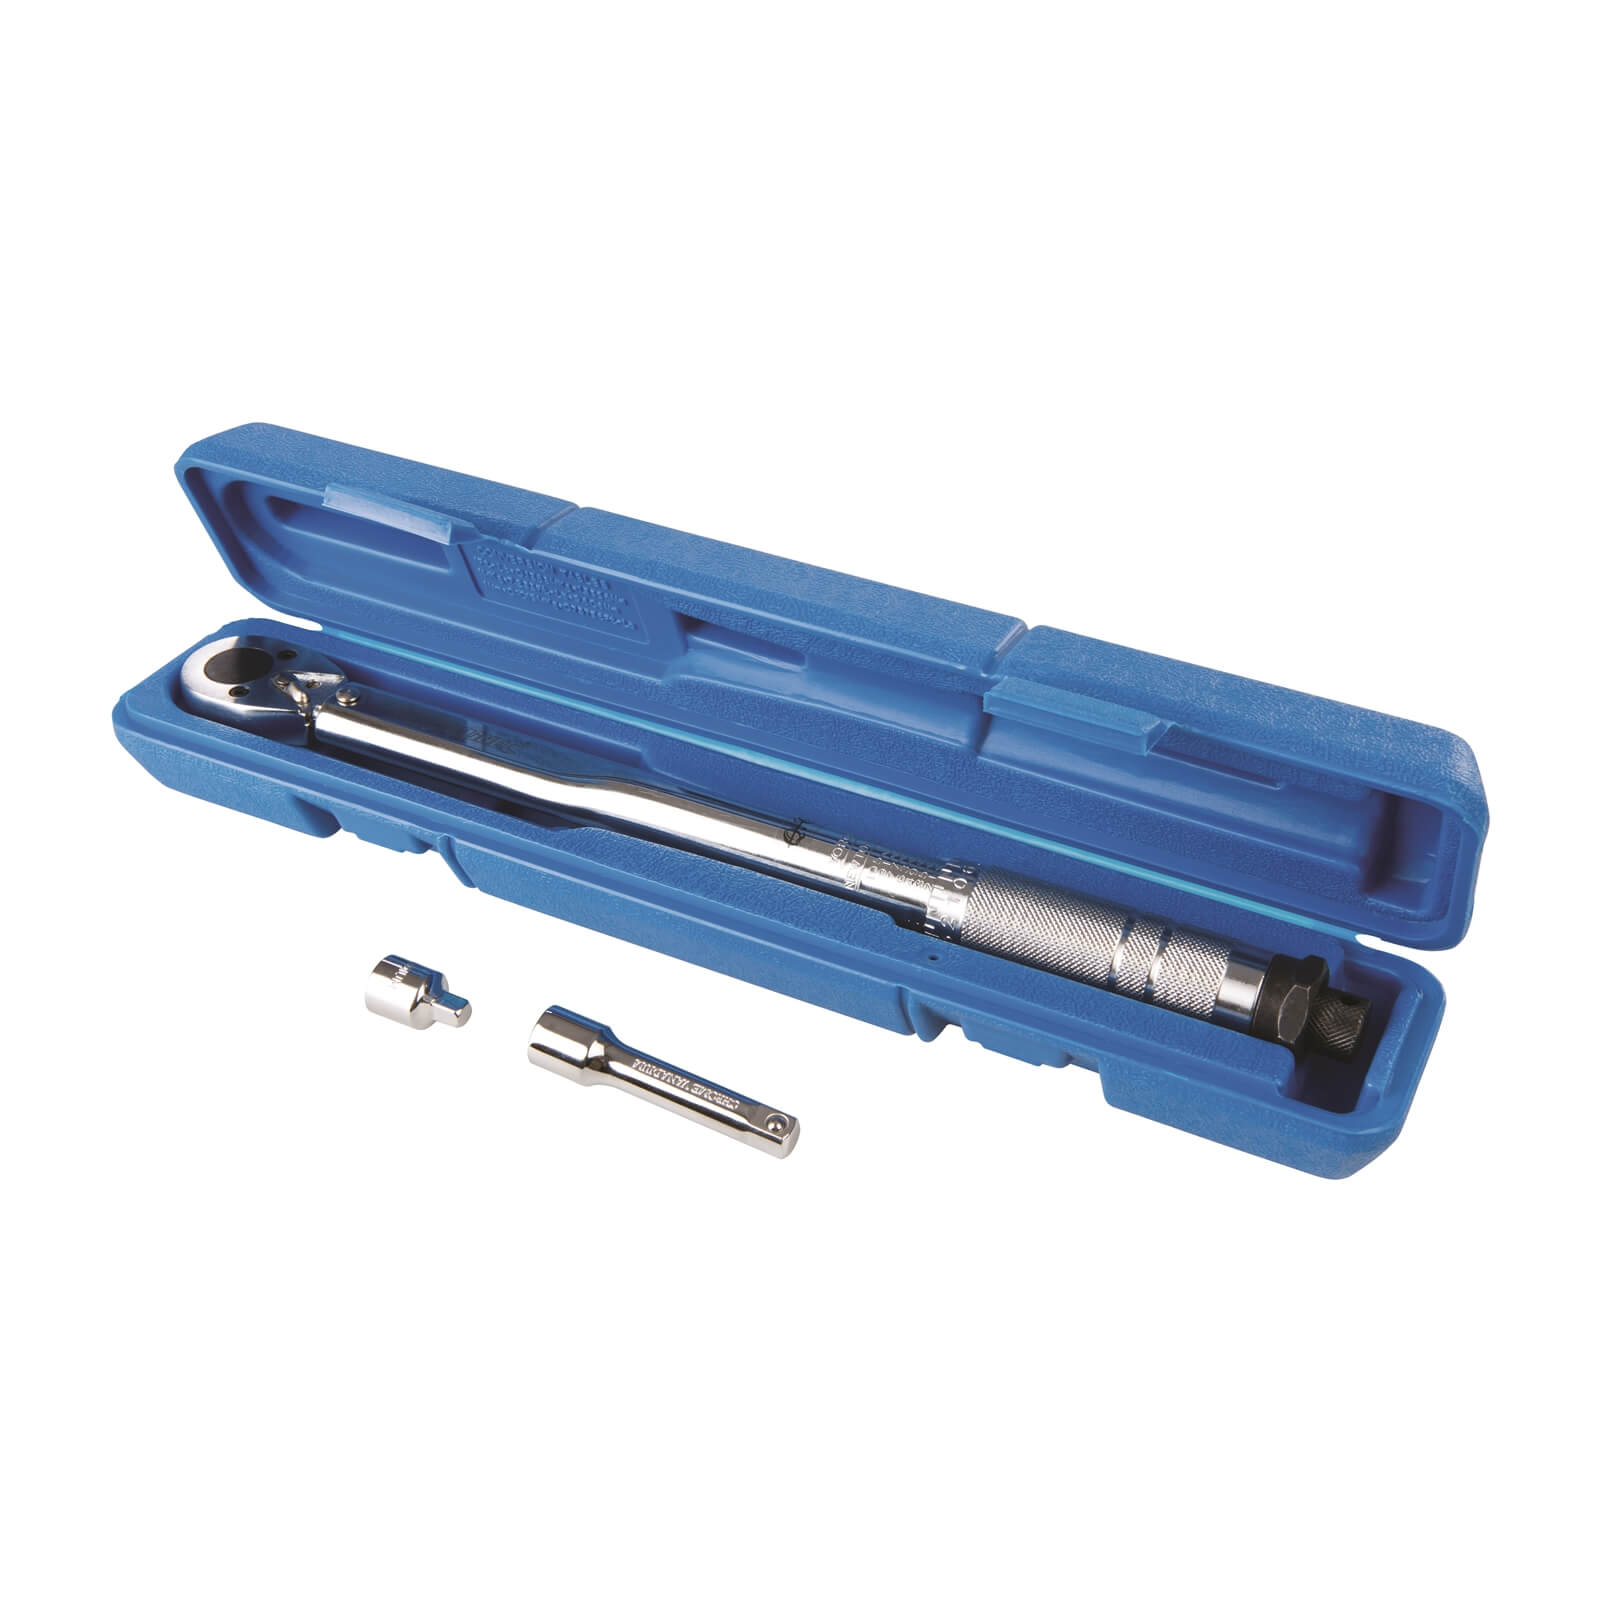 Silverline Torque Wrench 8 - 105Nm 3/8 Drive